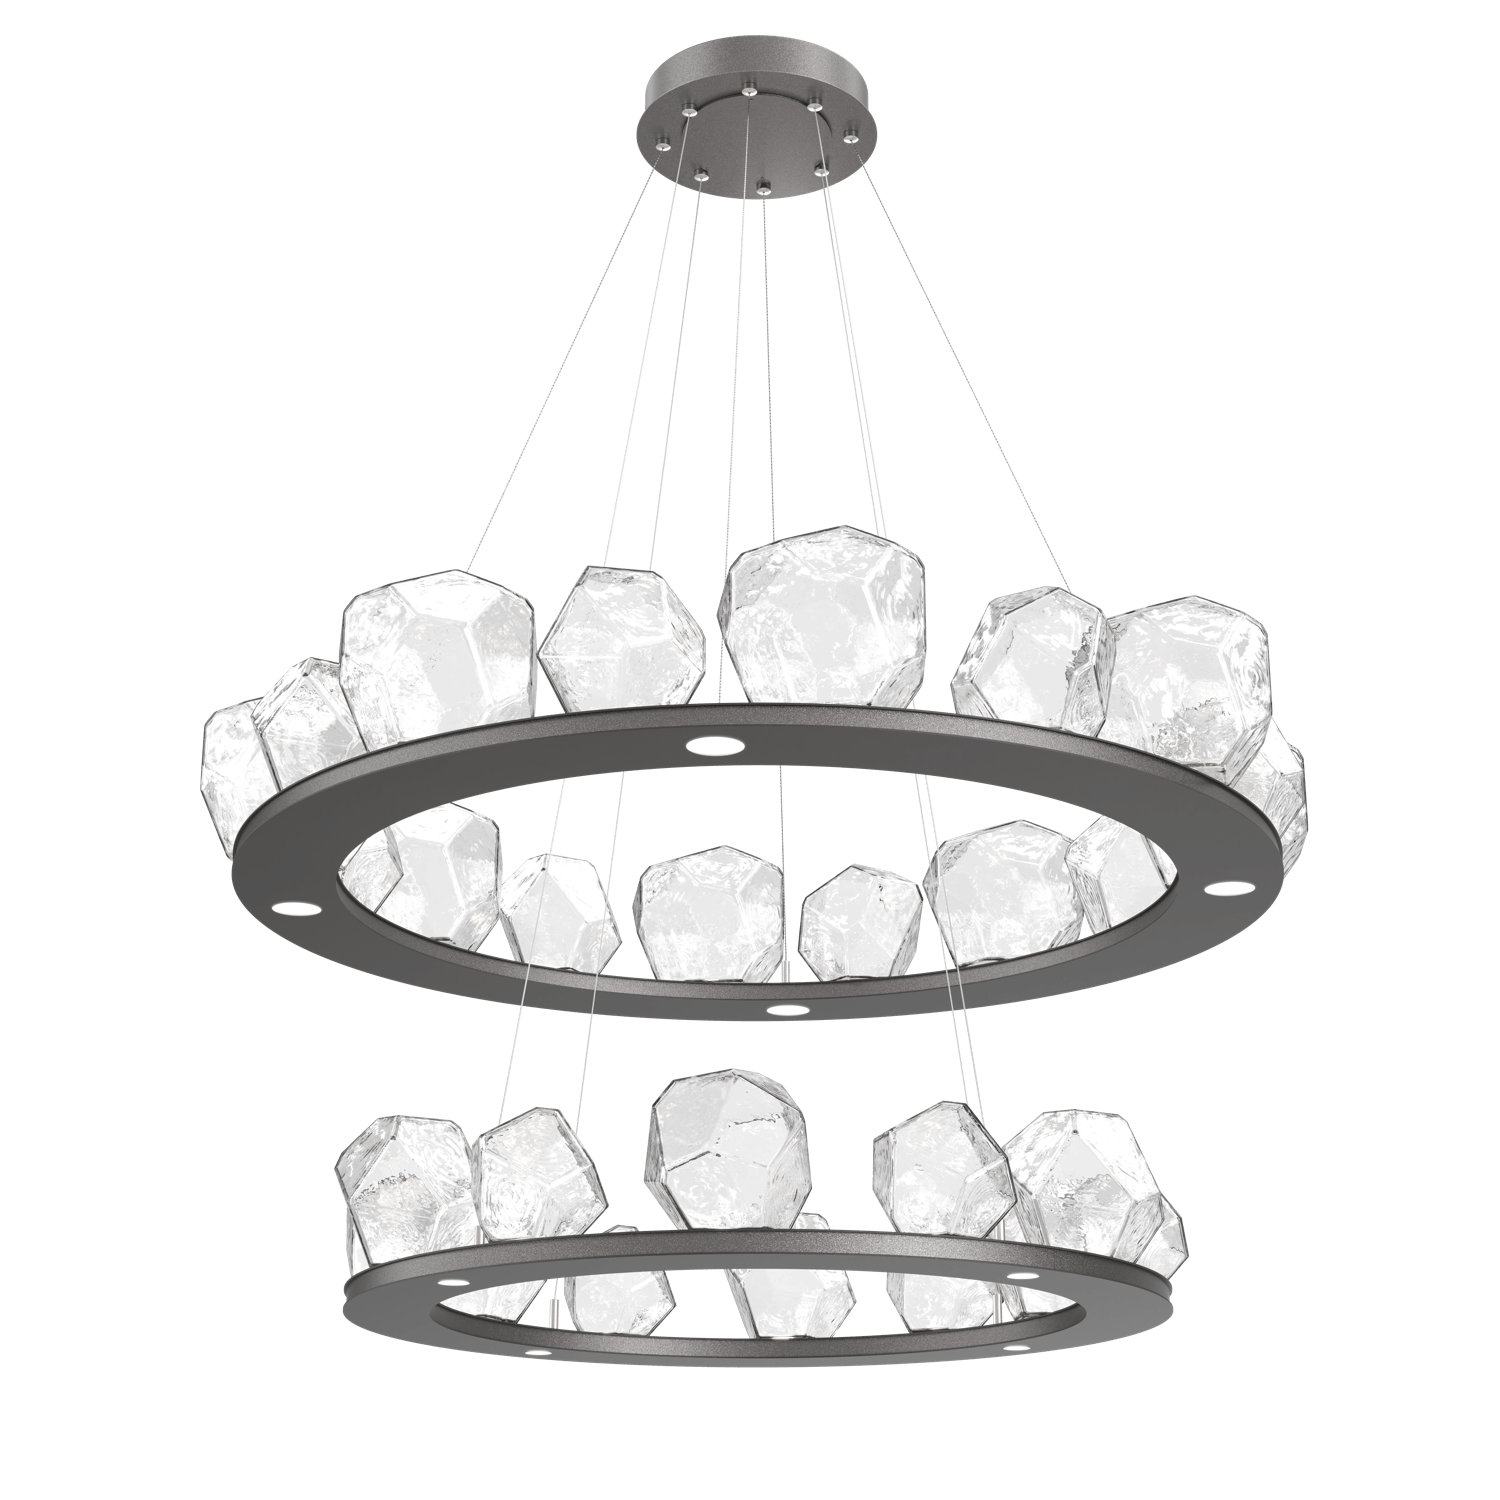 CHB0039-2B-GP-C-Hammerton-Studio-Gem-48-inch-two-tier-ring-chandelier-with-graphite-finish-and-clear-blown-glass-shades-and-LED-lamping